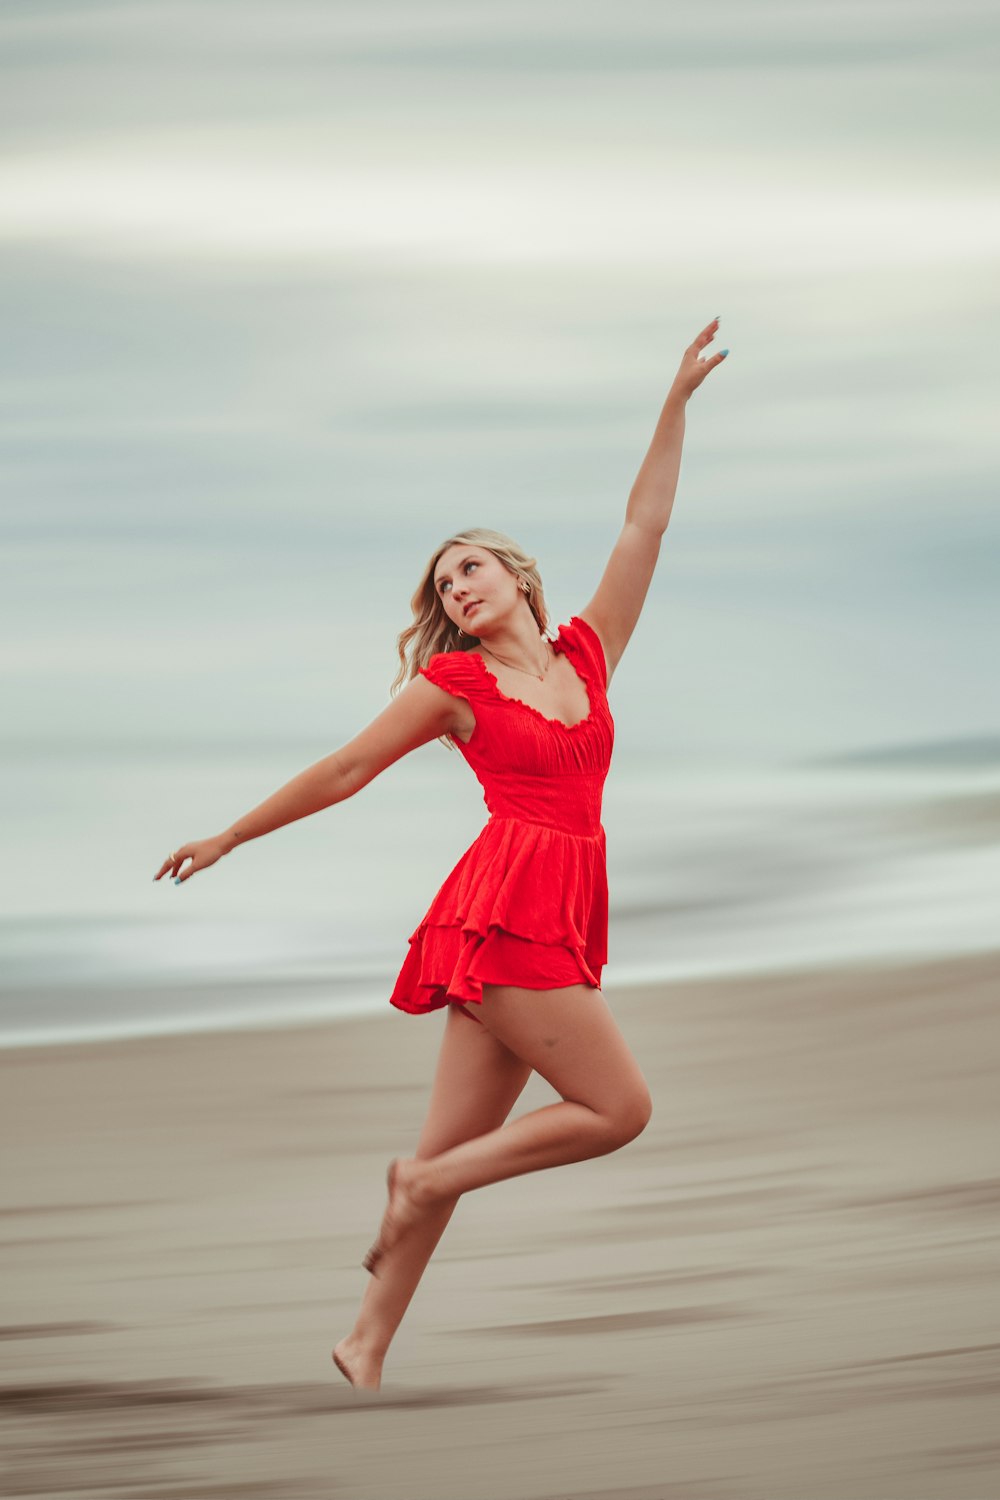 a woman in a red dress jumping on a beach